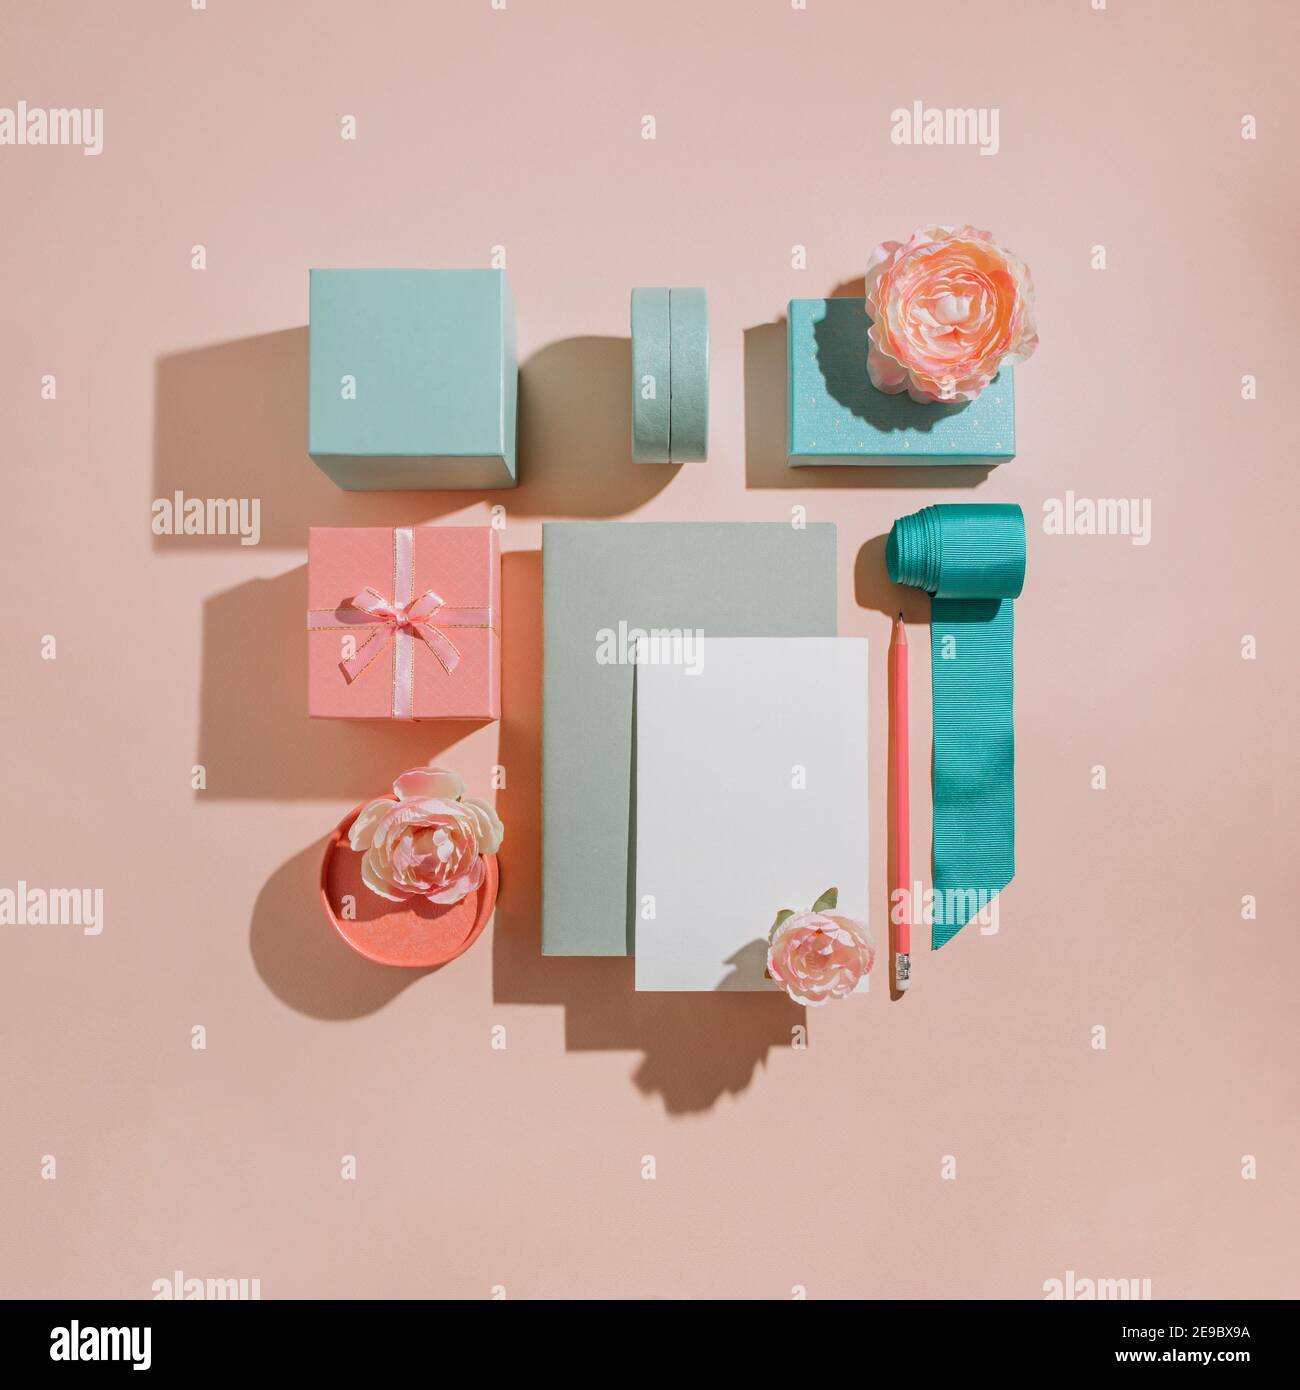 Geometric composition of gift boxes with flowers, mockup for cards, invitations in pastel muted colors. Romantic concept layout for wedding invitation Stock Photo